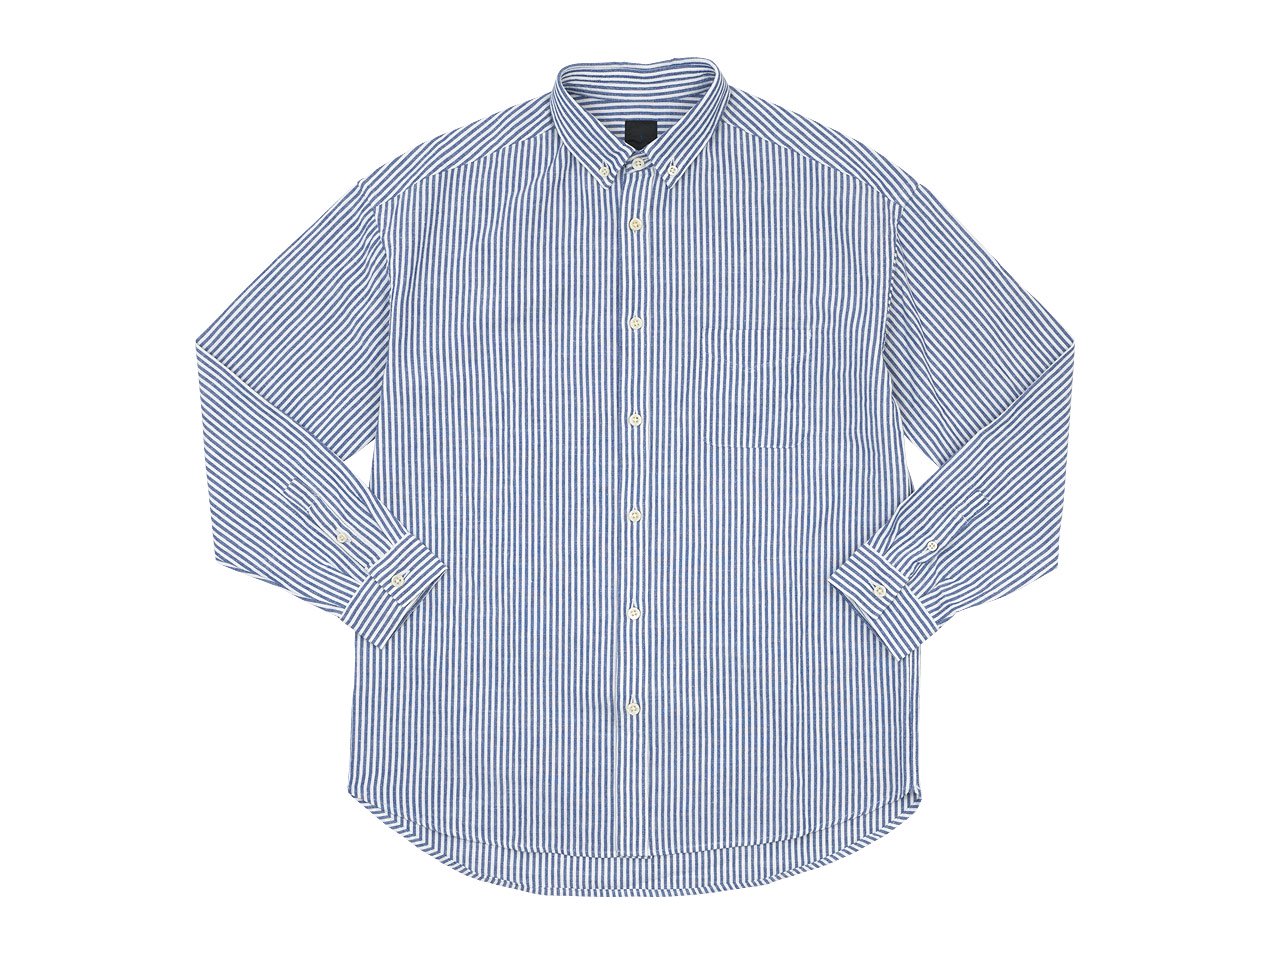 maillot sunset relax B.D. shirts BLUE STRIPE maillot通販・取扱い ...